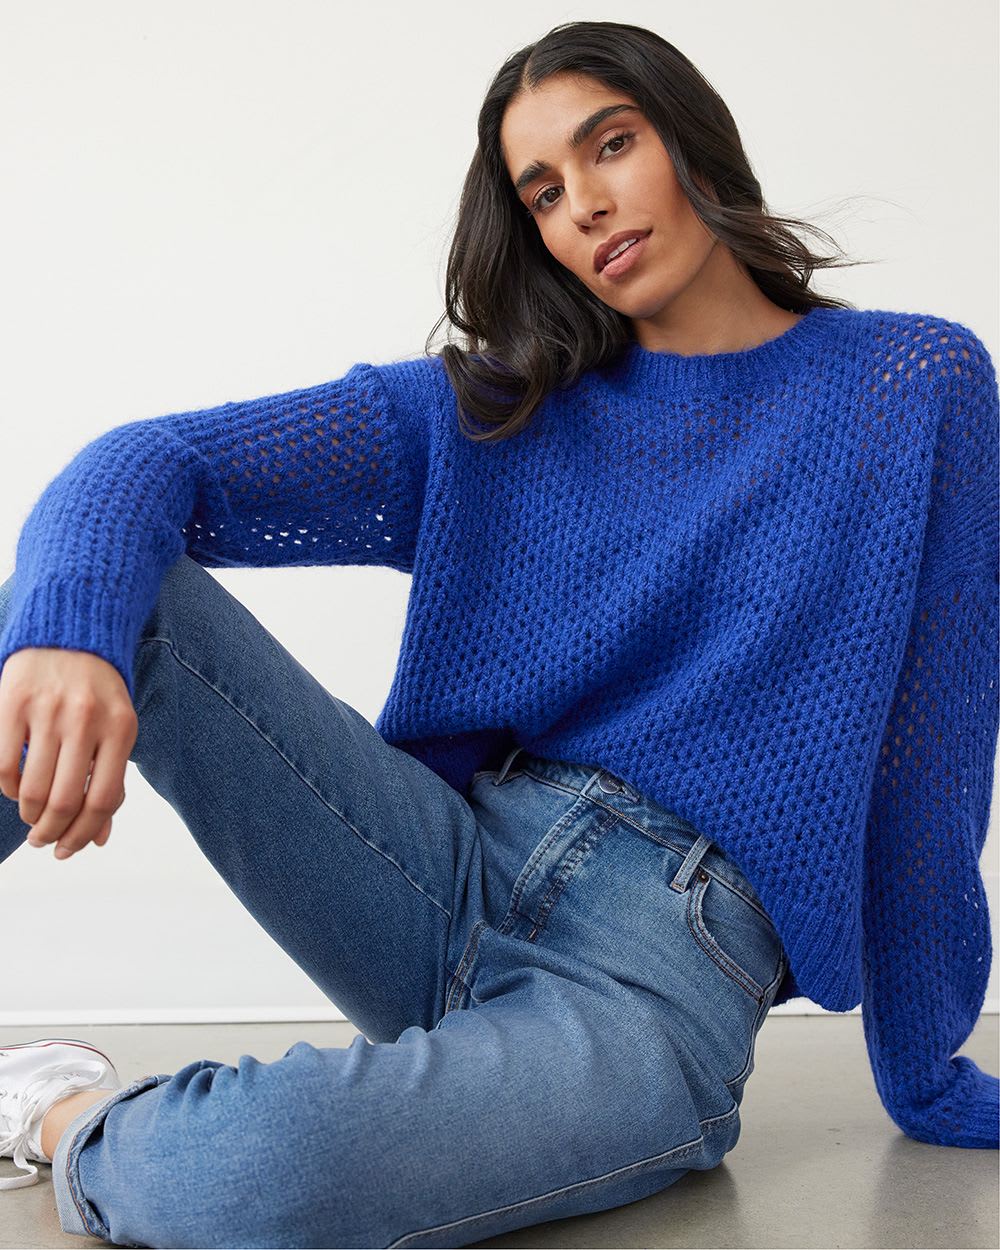 woman wearing blue knit sweater and jeans